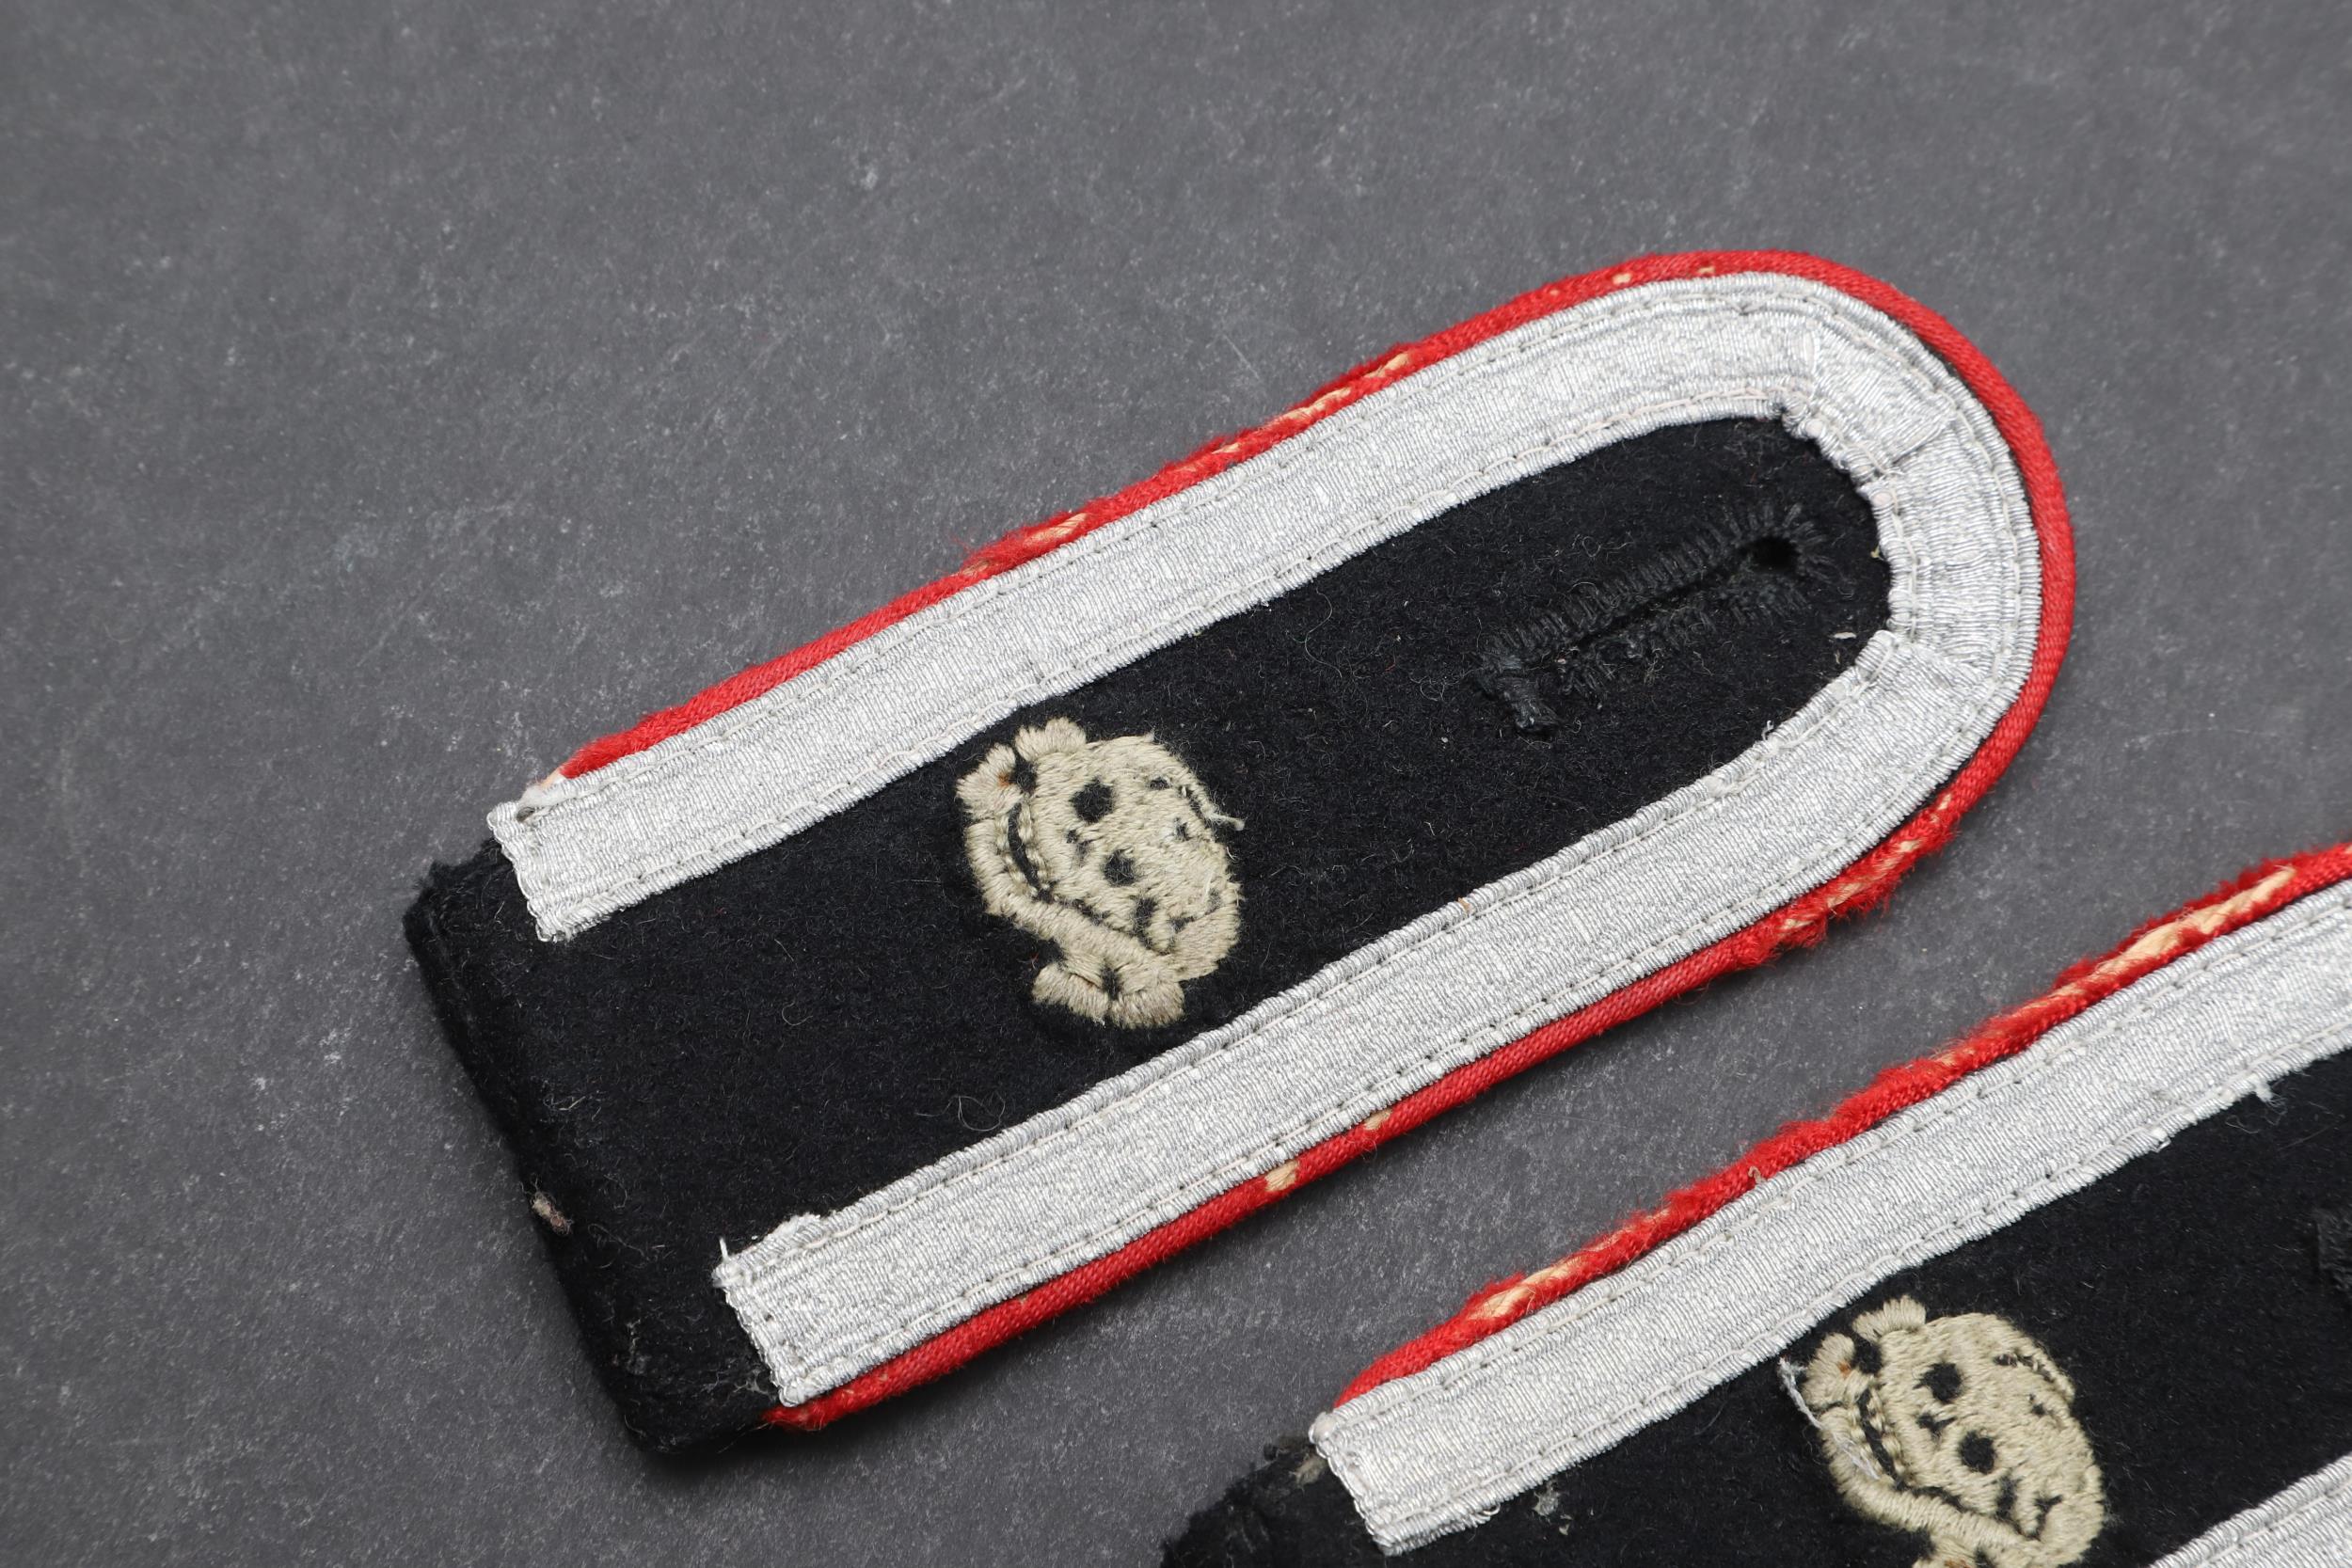 A PAIR OF SECOND WORLD WAR GERMAN WAFFEN-SS 'TOTENKOPF SHOULDER STRAPS. - Image 2 of 4